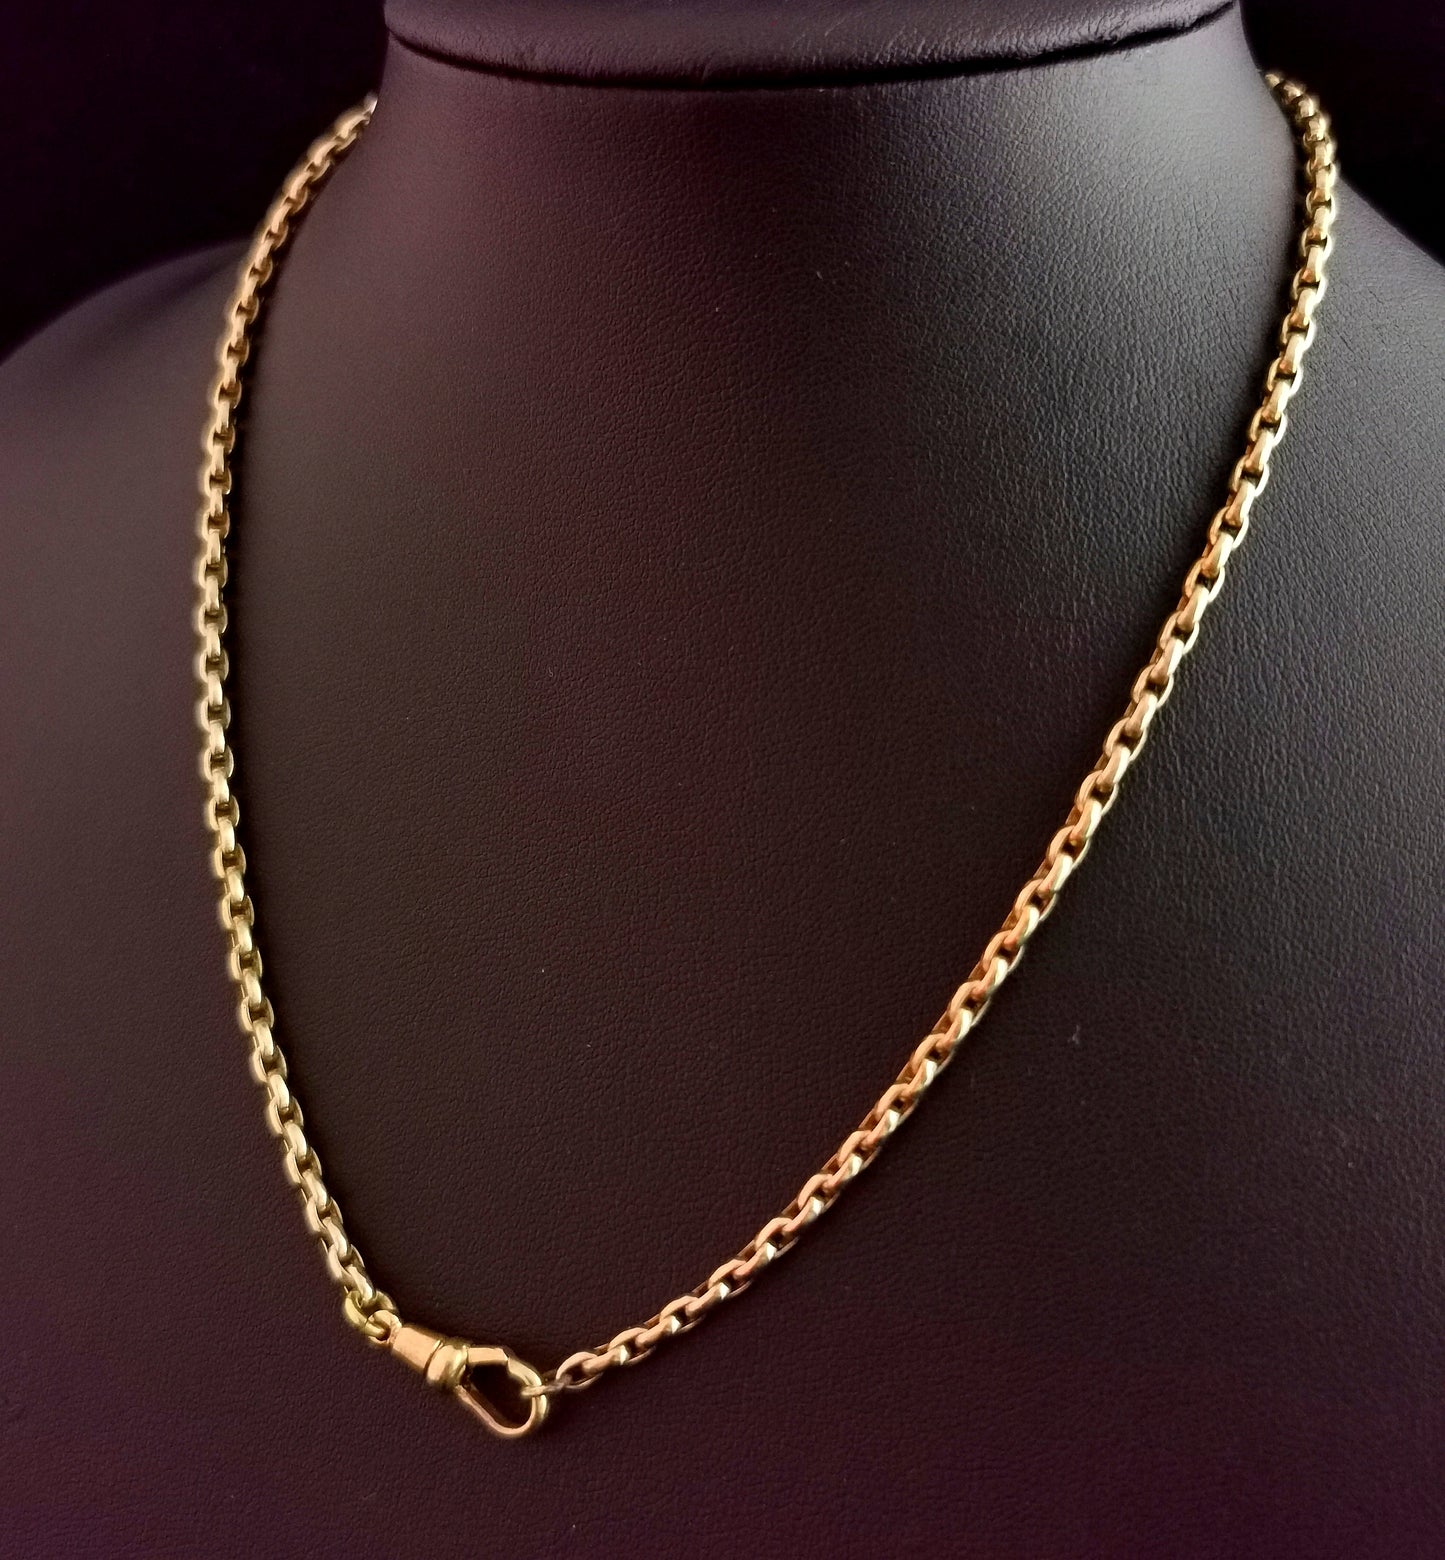 Vintage Art Deco 9ct gold filled watch chain necklace